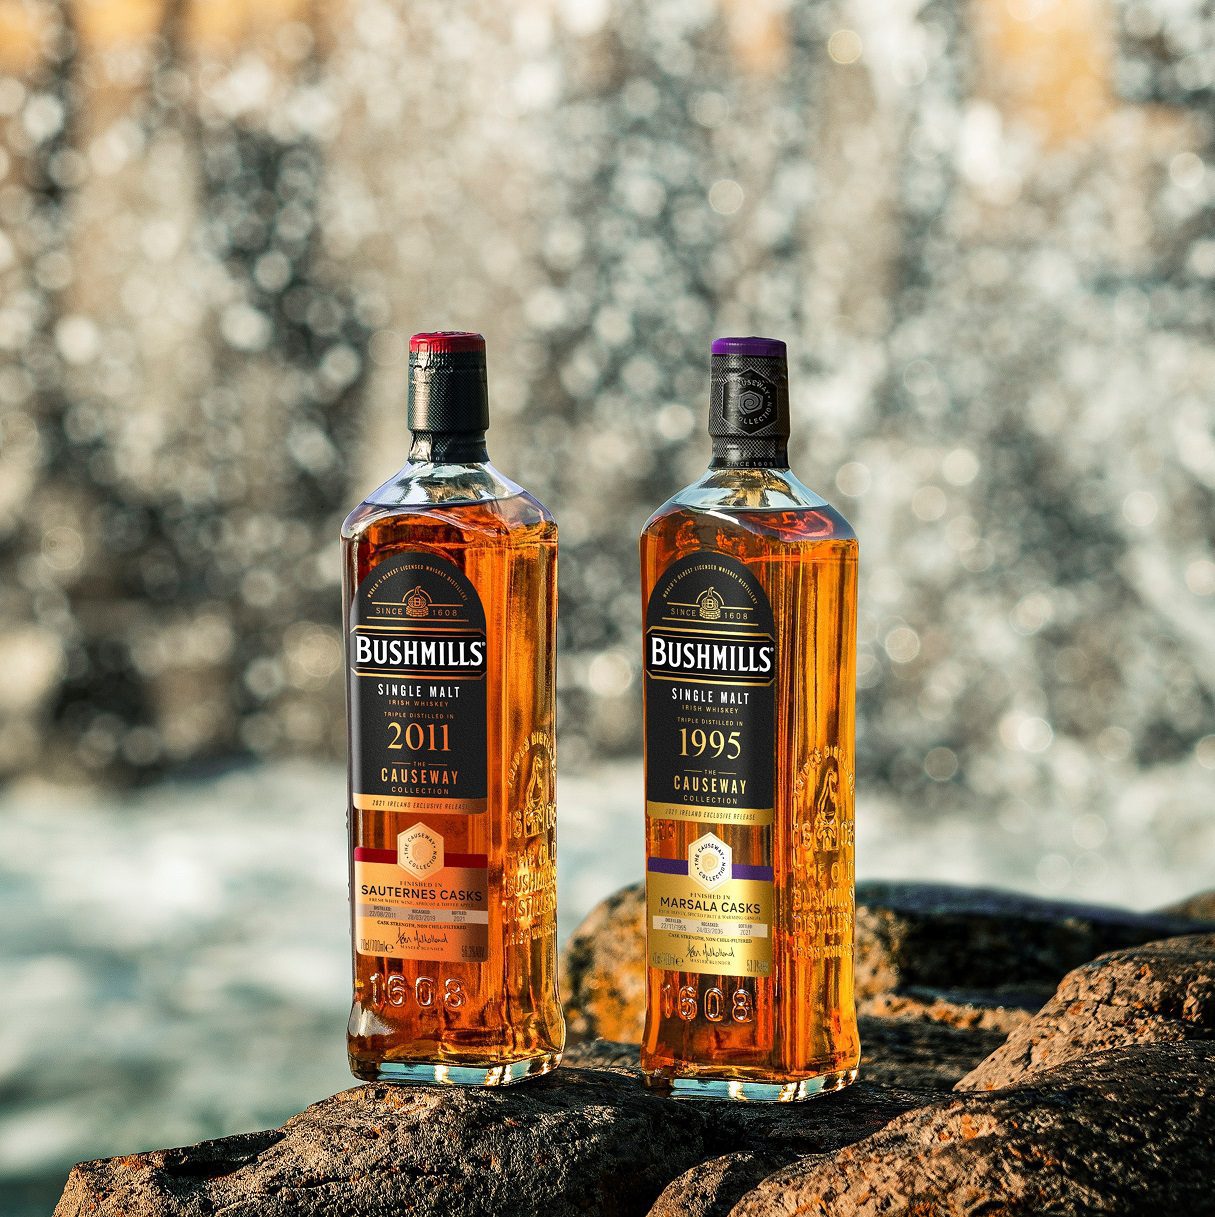 Bushmills Causeway Collection 2021 Irish Whiskey Blogger Stuart Mcnamara Bushmills Irish Whiskeyis Set to Make Waves Again with Its New Series of Exclusive and Elusive Single Malt Causeway Collection Releases for 2021 International Whiskey Reviews by Irish Whiskey Blogger Stuart Mcnamara